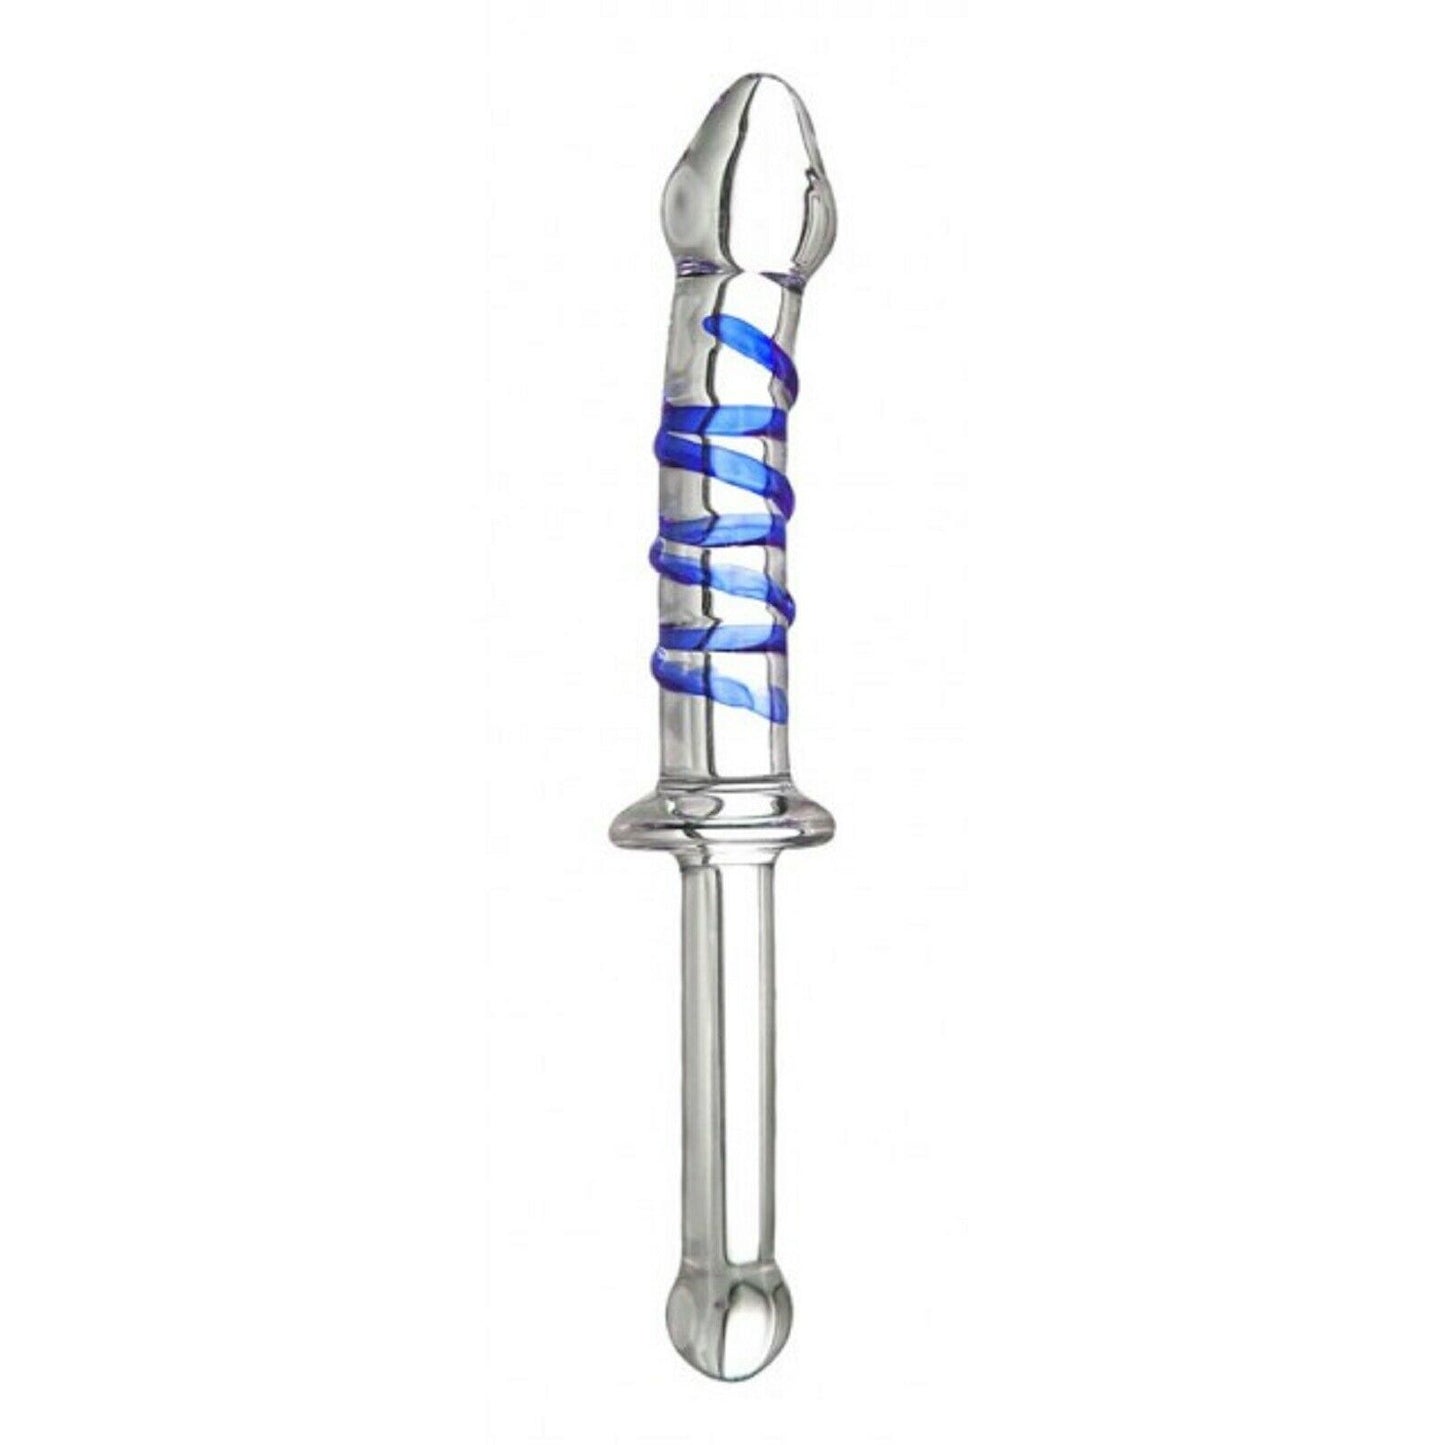 Glass Big Dildo Dong Handle Thruster Wand Large Anal Butt Plug Vaginal Sex Toy